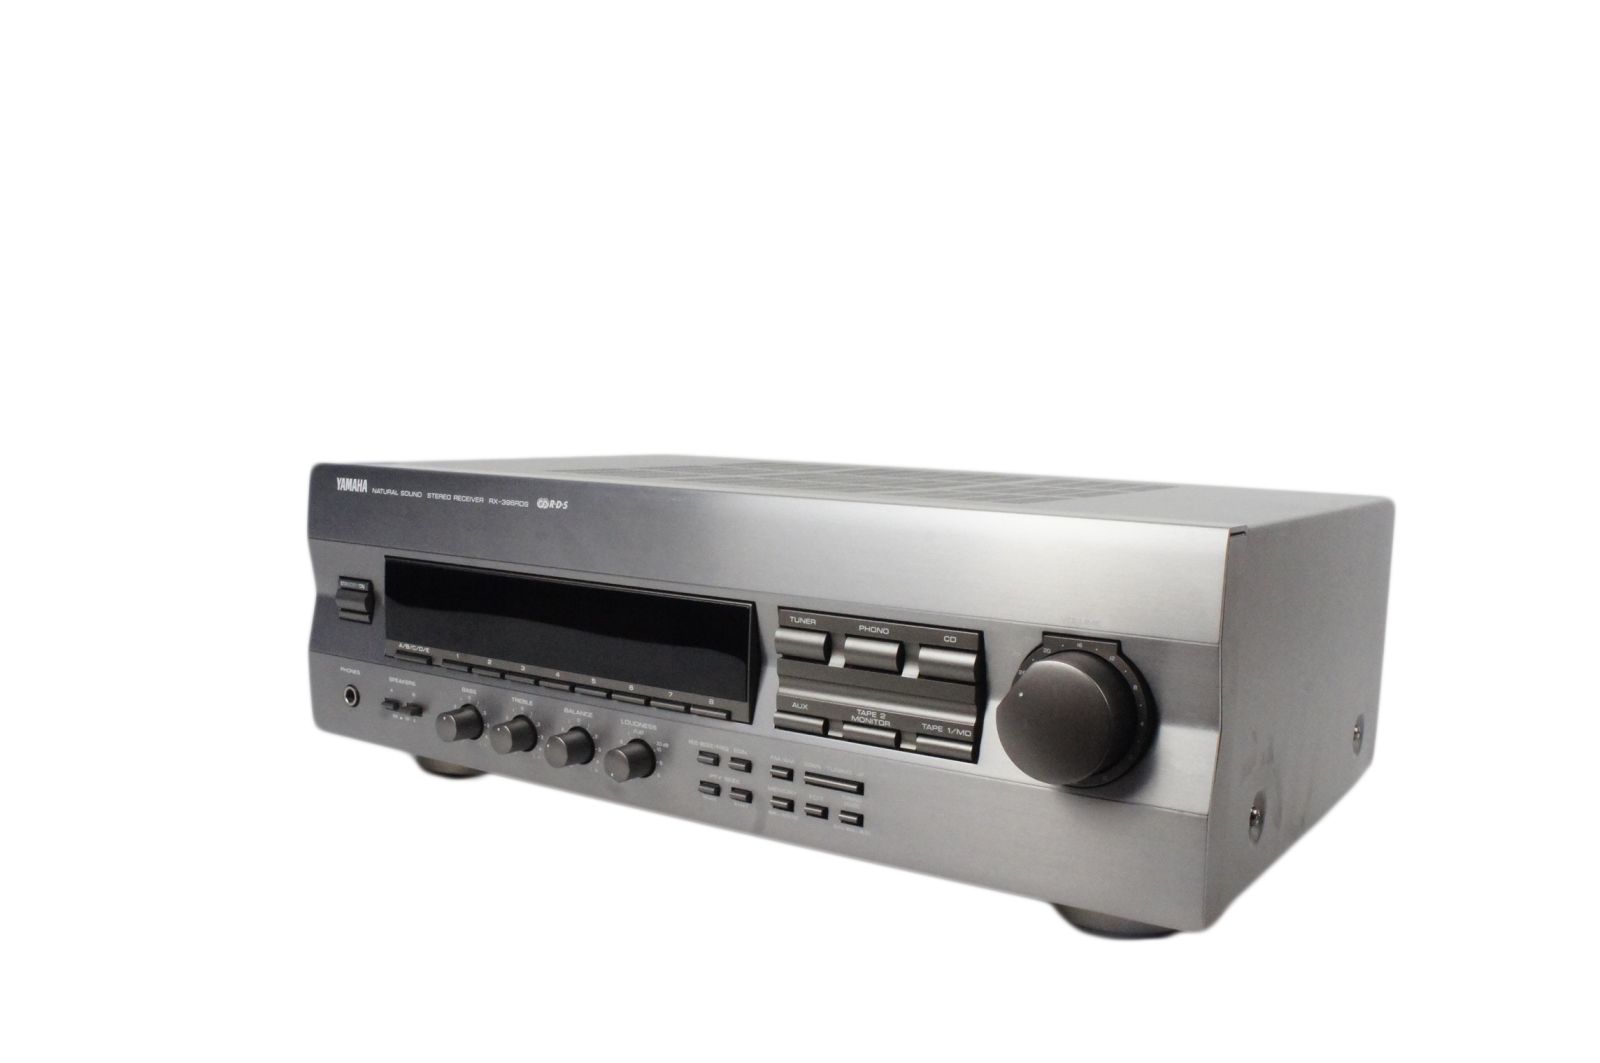 Yamaha_RX-396_RDS_Stereo_Receiver_07